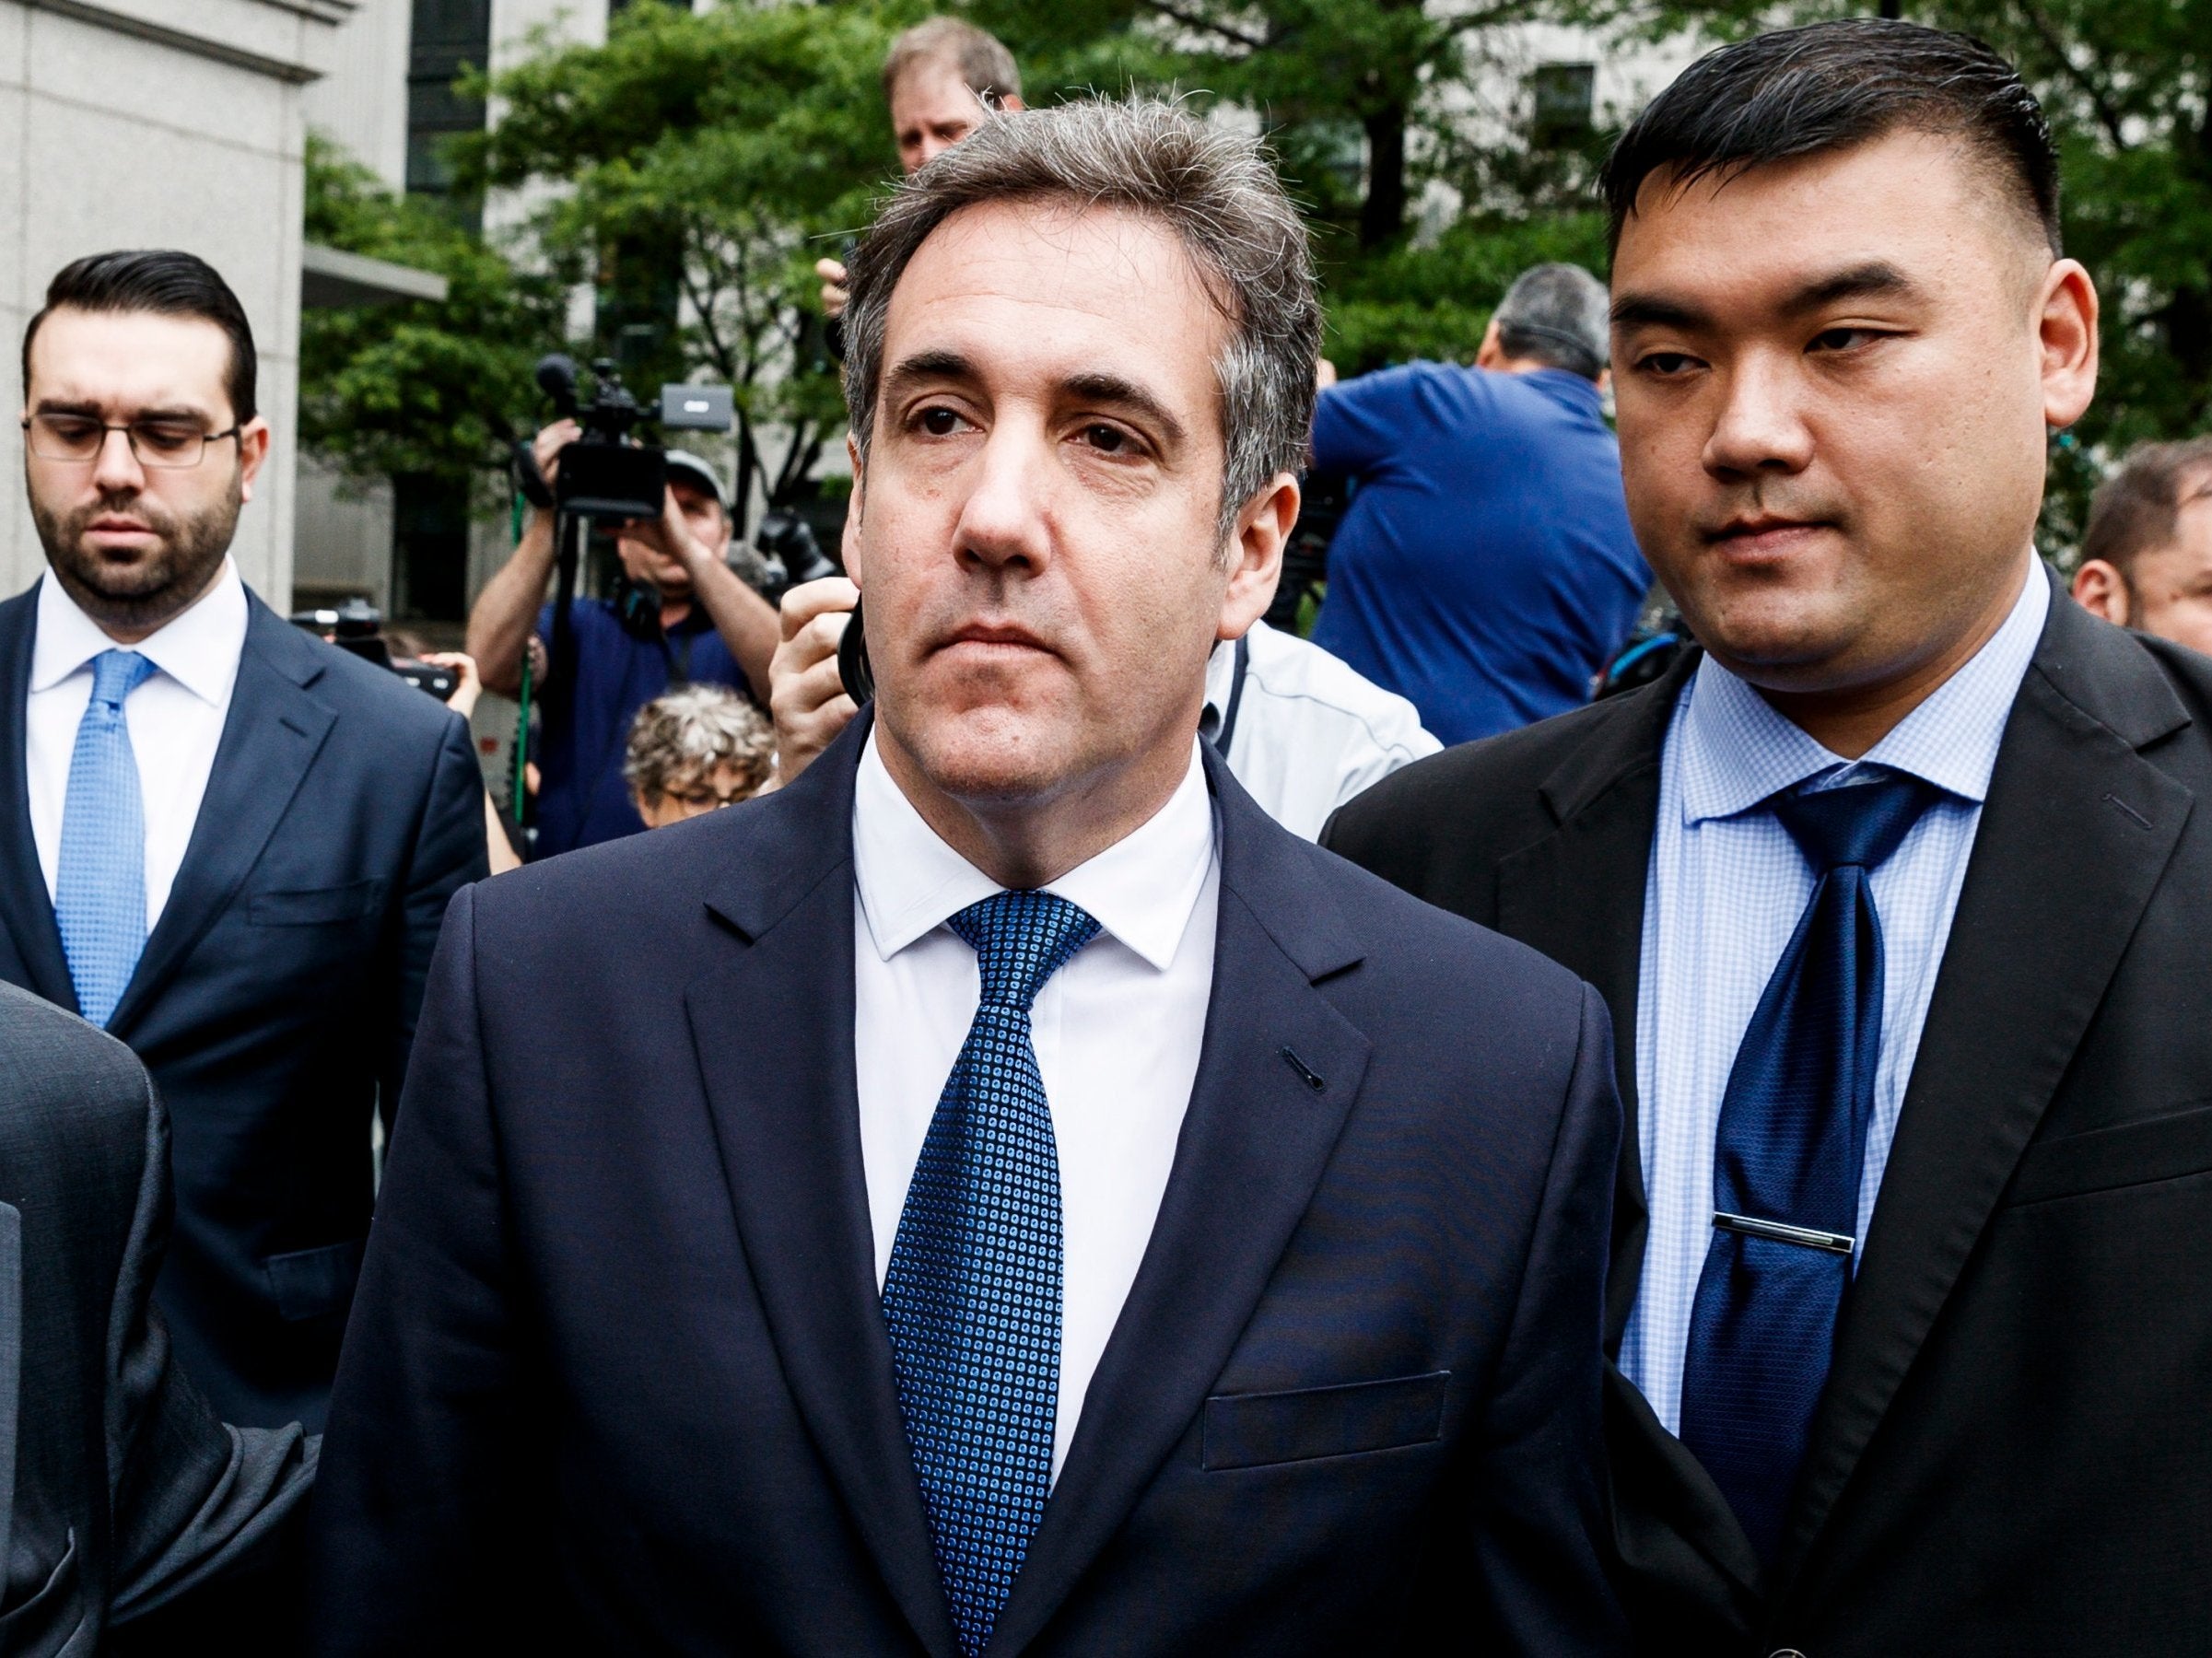 Michael Cohen has pleaded guilty in federal court to lying to Congress over Trump property deal in Moscow and hush money paid to women who might have embarrassed the president